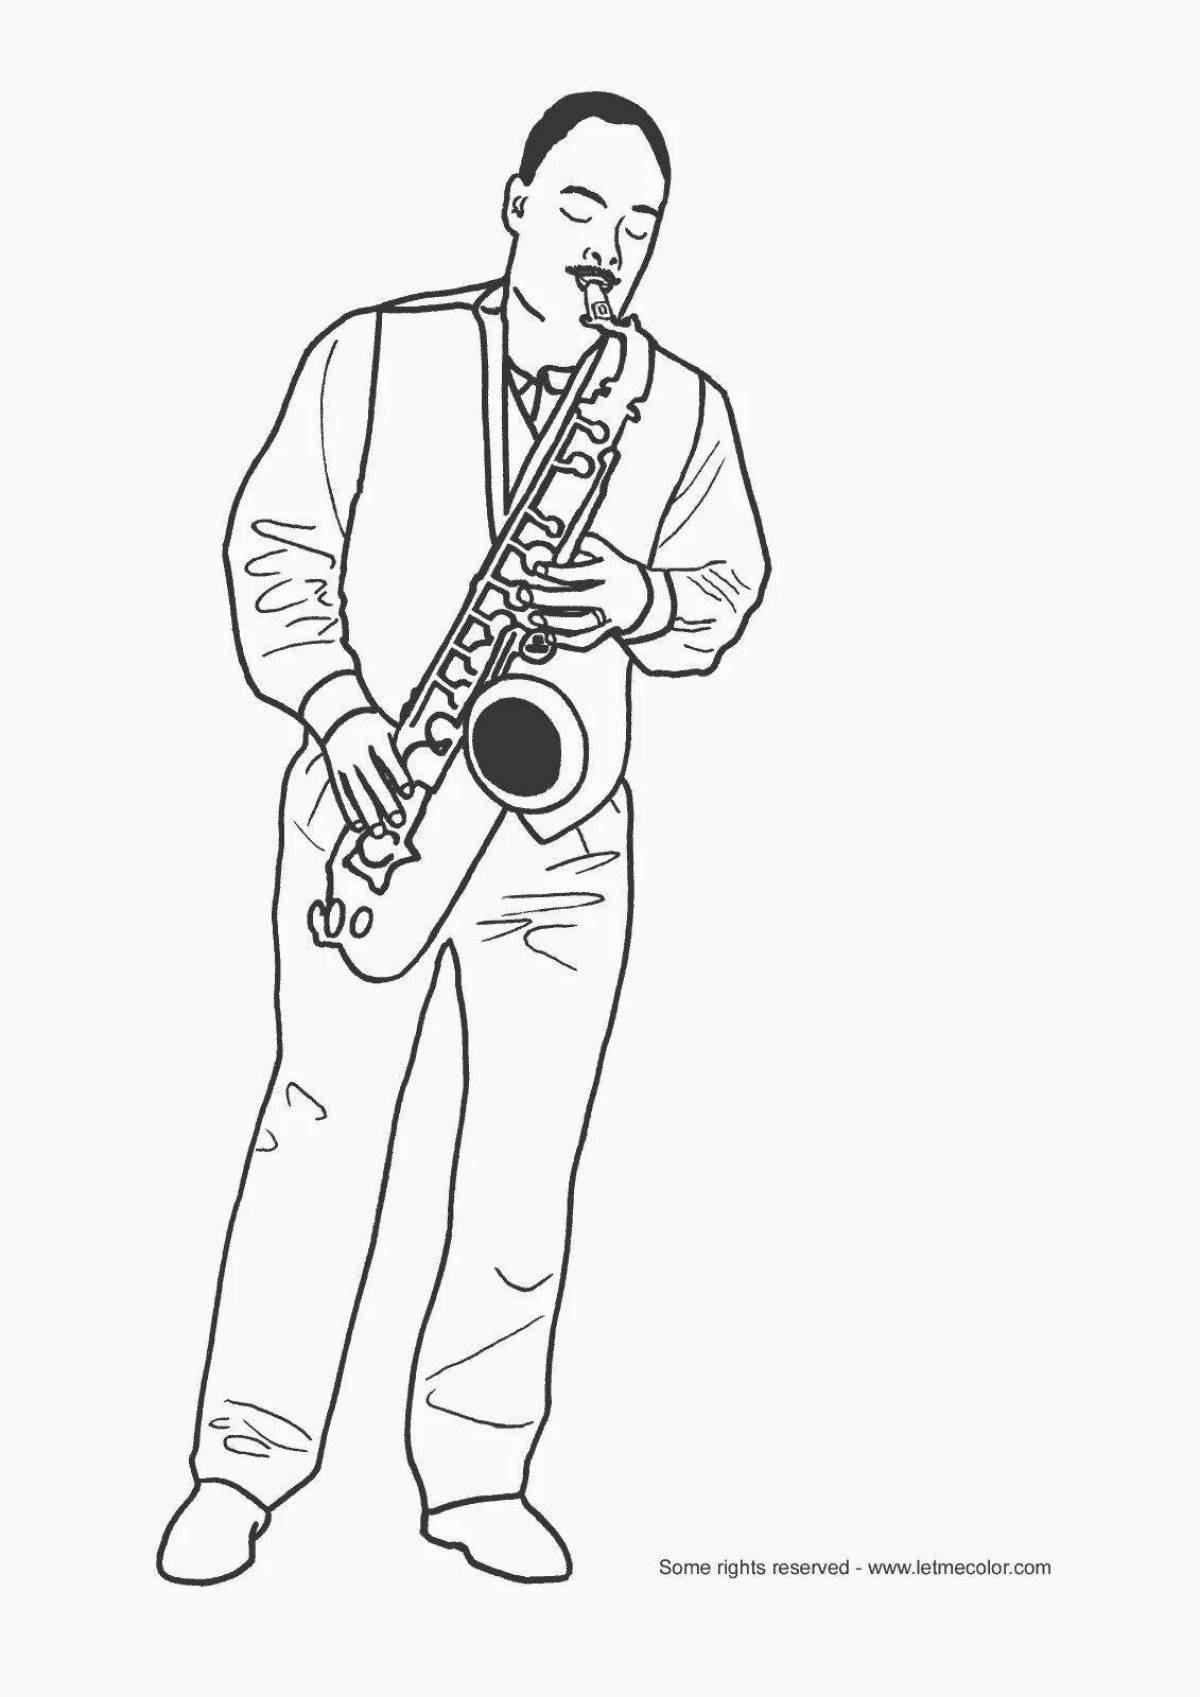 Live coloring musician